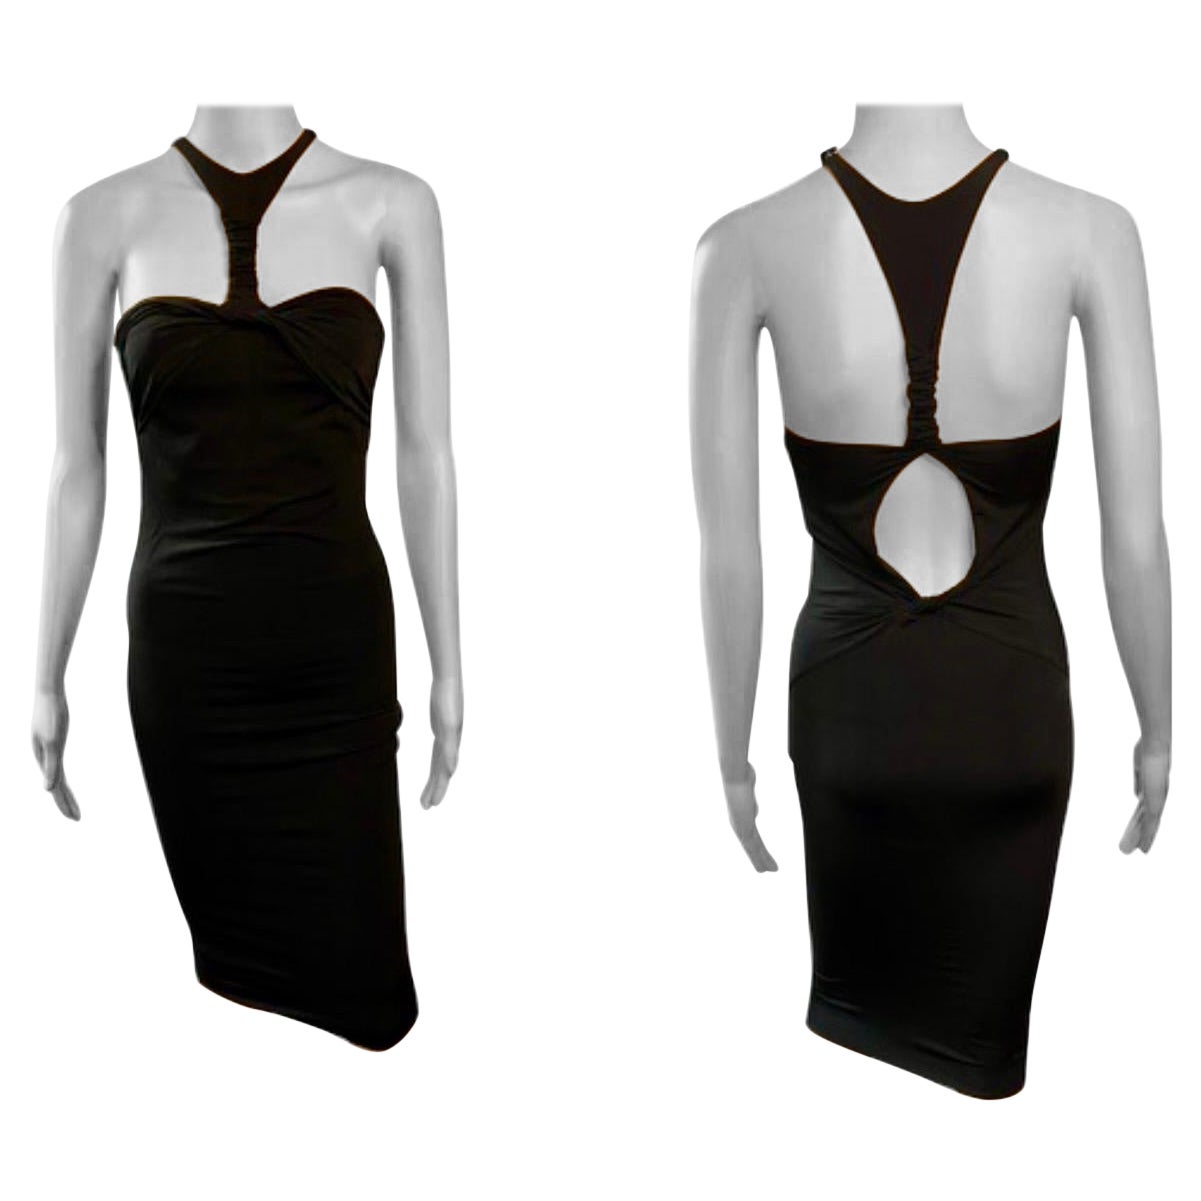 Tom Ford for Gucci F/W 2004 Plunging Cutout Black Evening Dress  For Sale